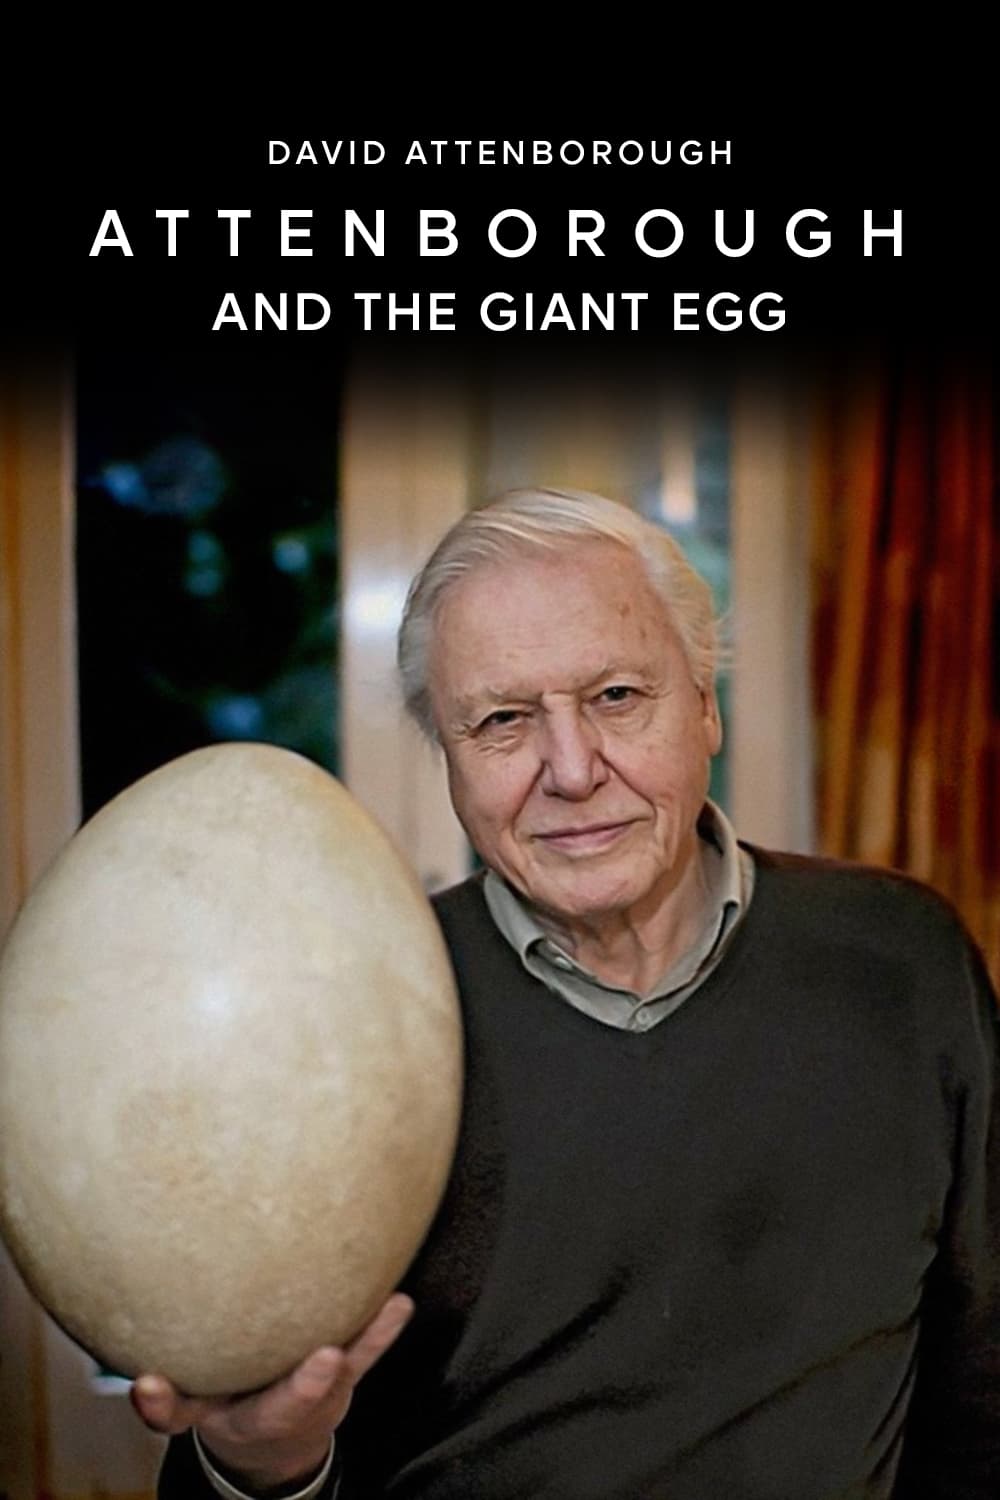 Attenborough and the Giant Egg